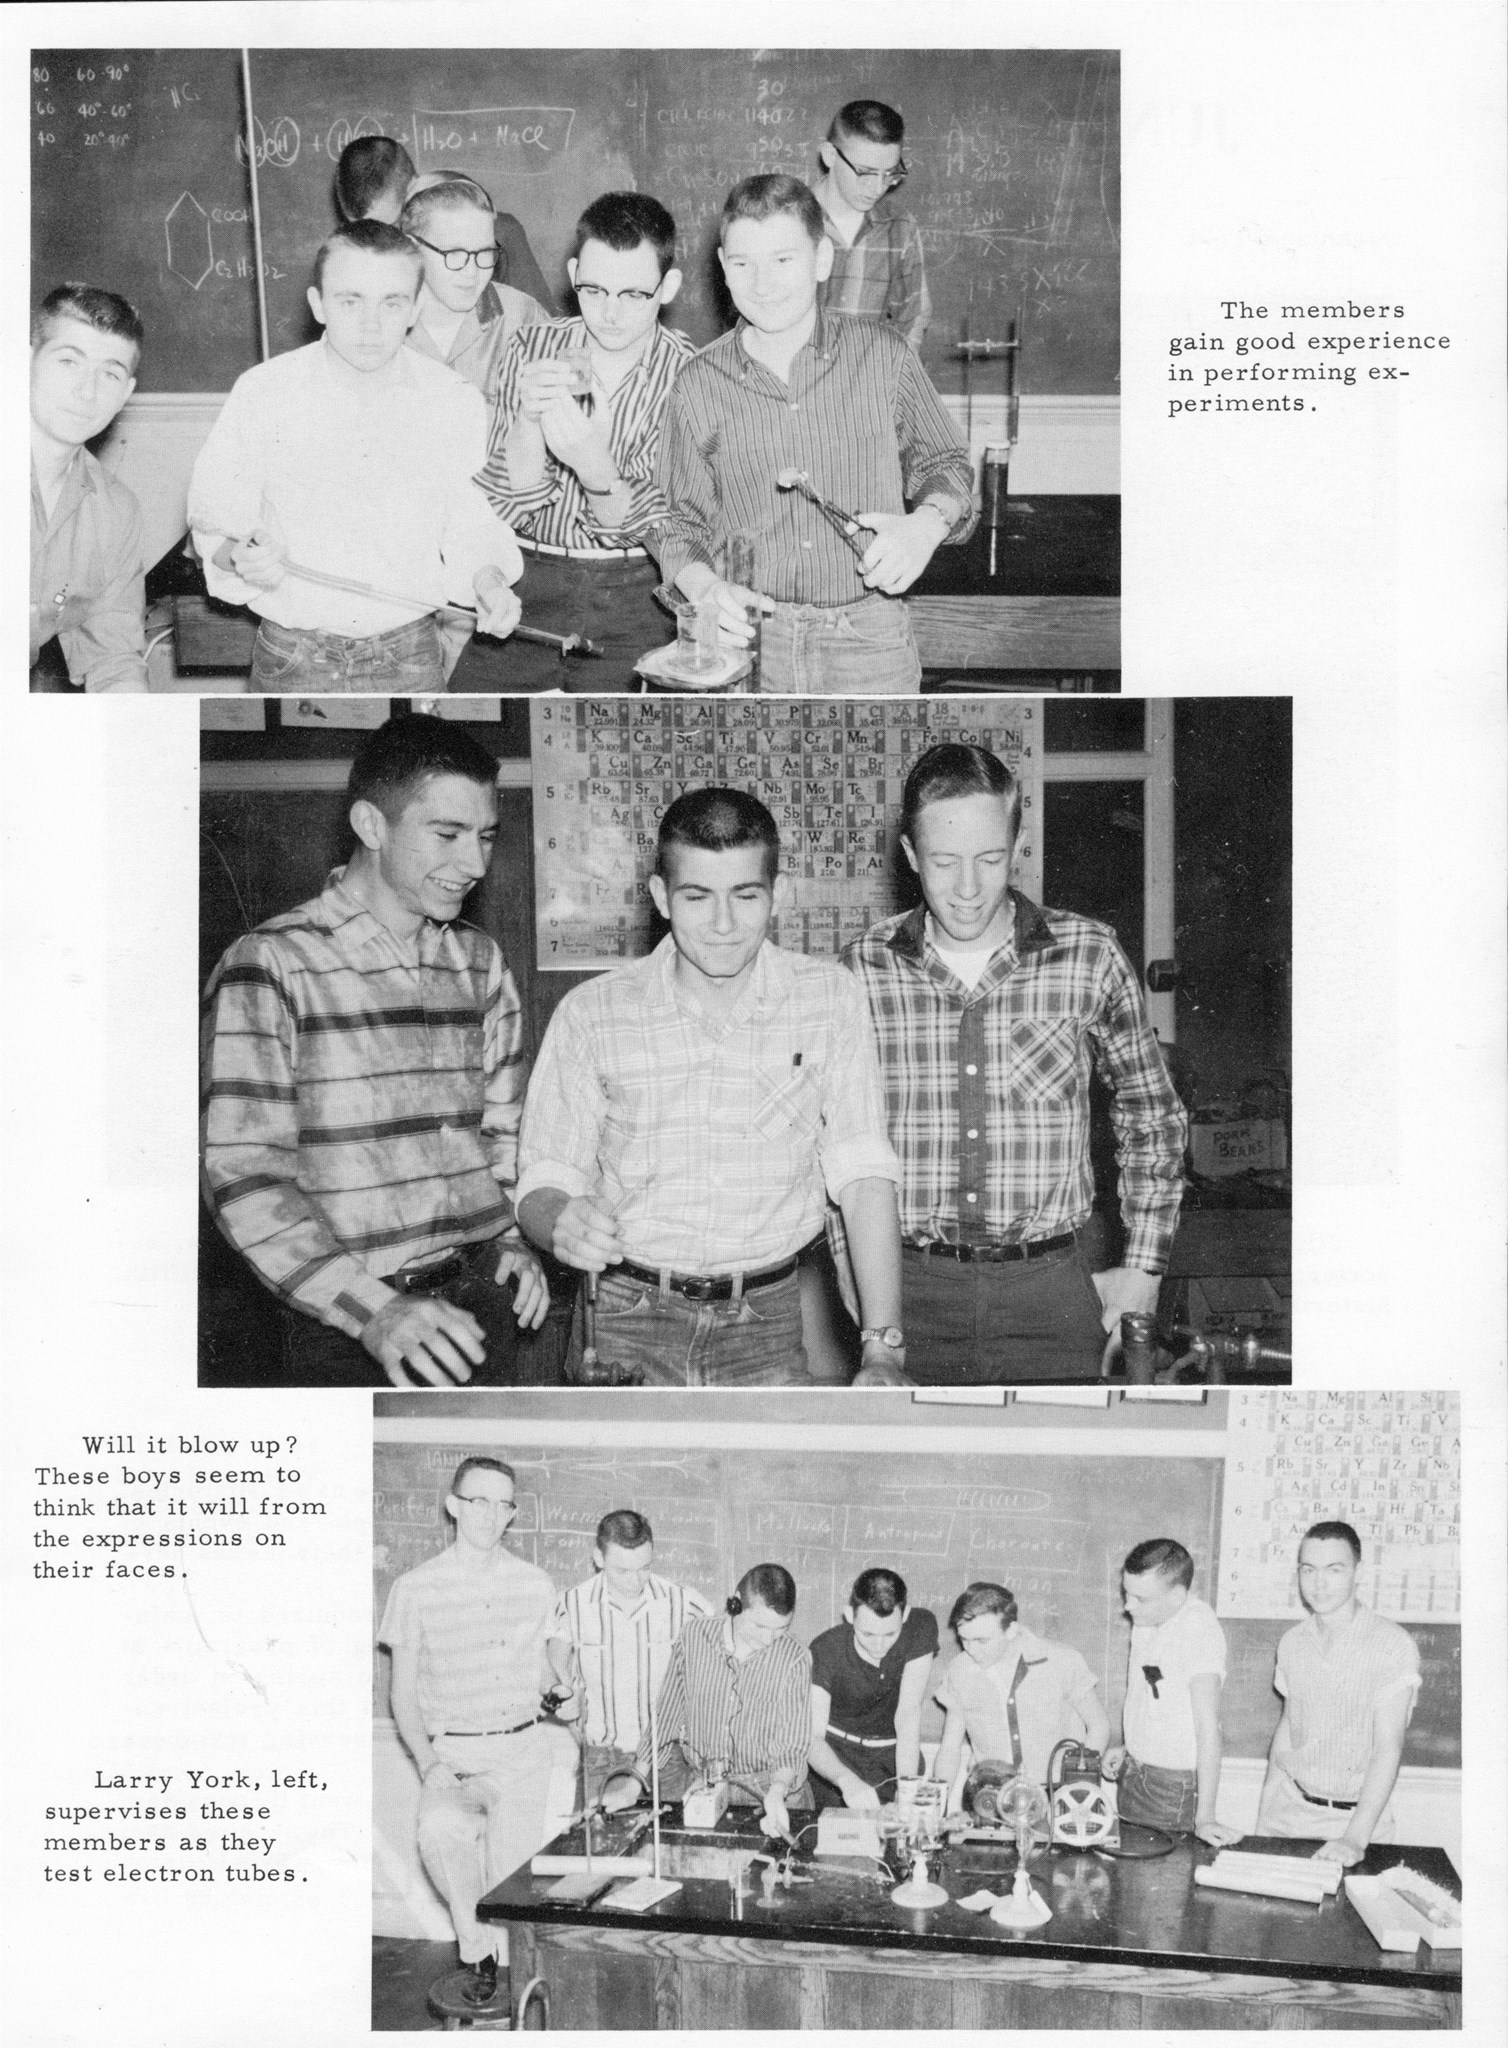 ../../../Images/Large/1959/Arclight-1959-pg0099.jpg